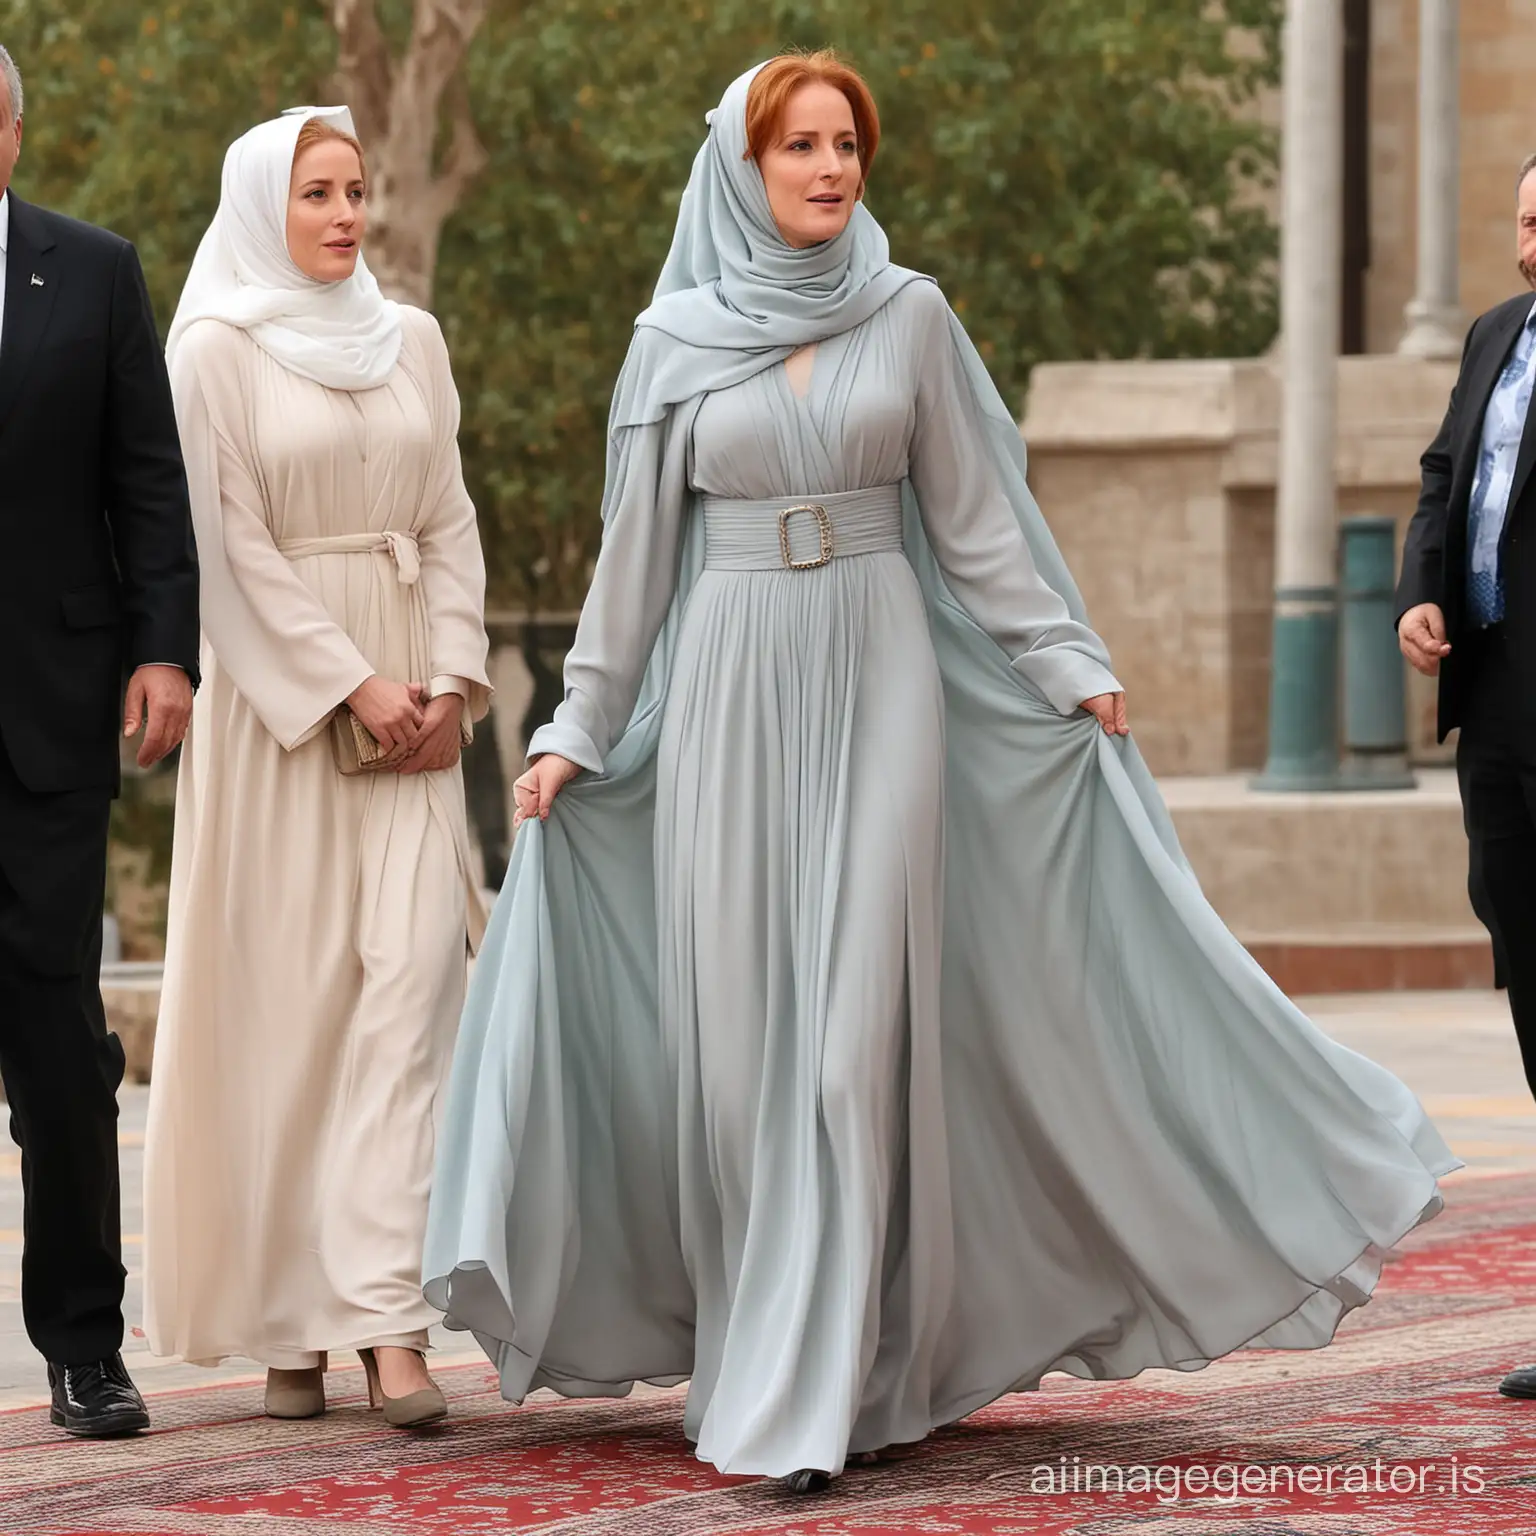 red haired Gillian Anderson in hijab with floor length skirt and long flowing outer abaya hand in hand with president Erdogan